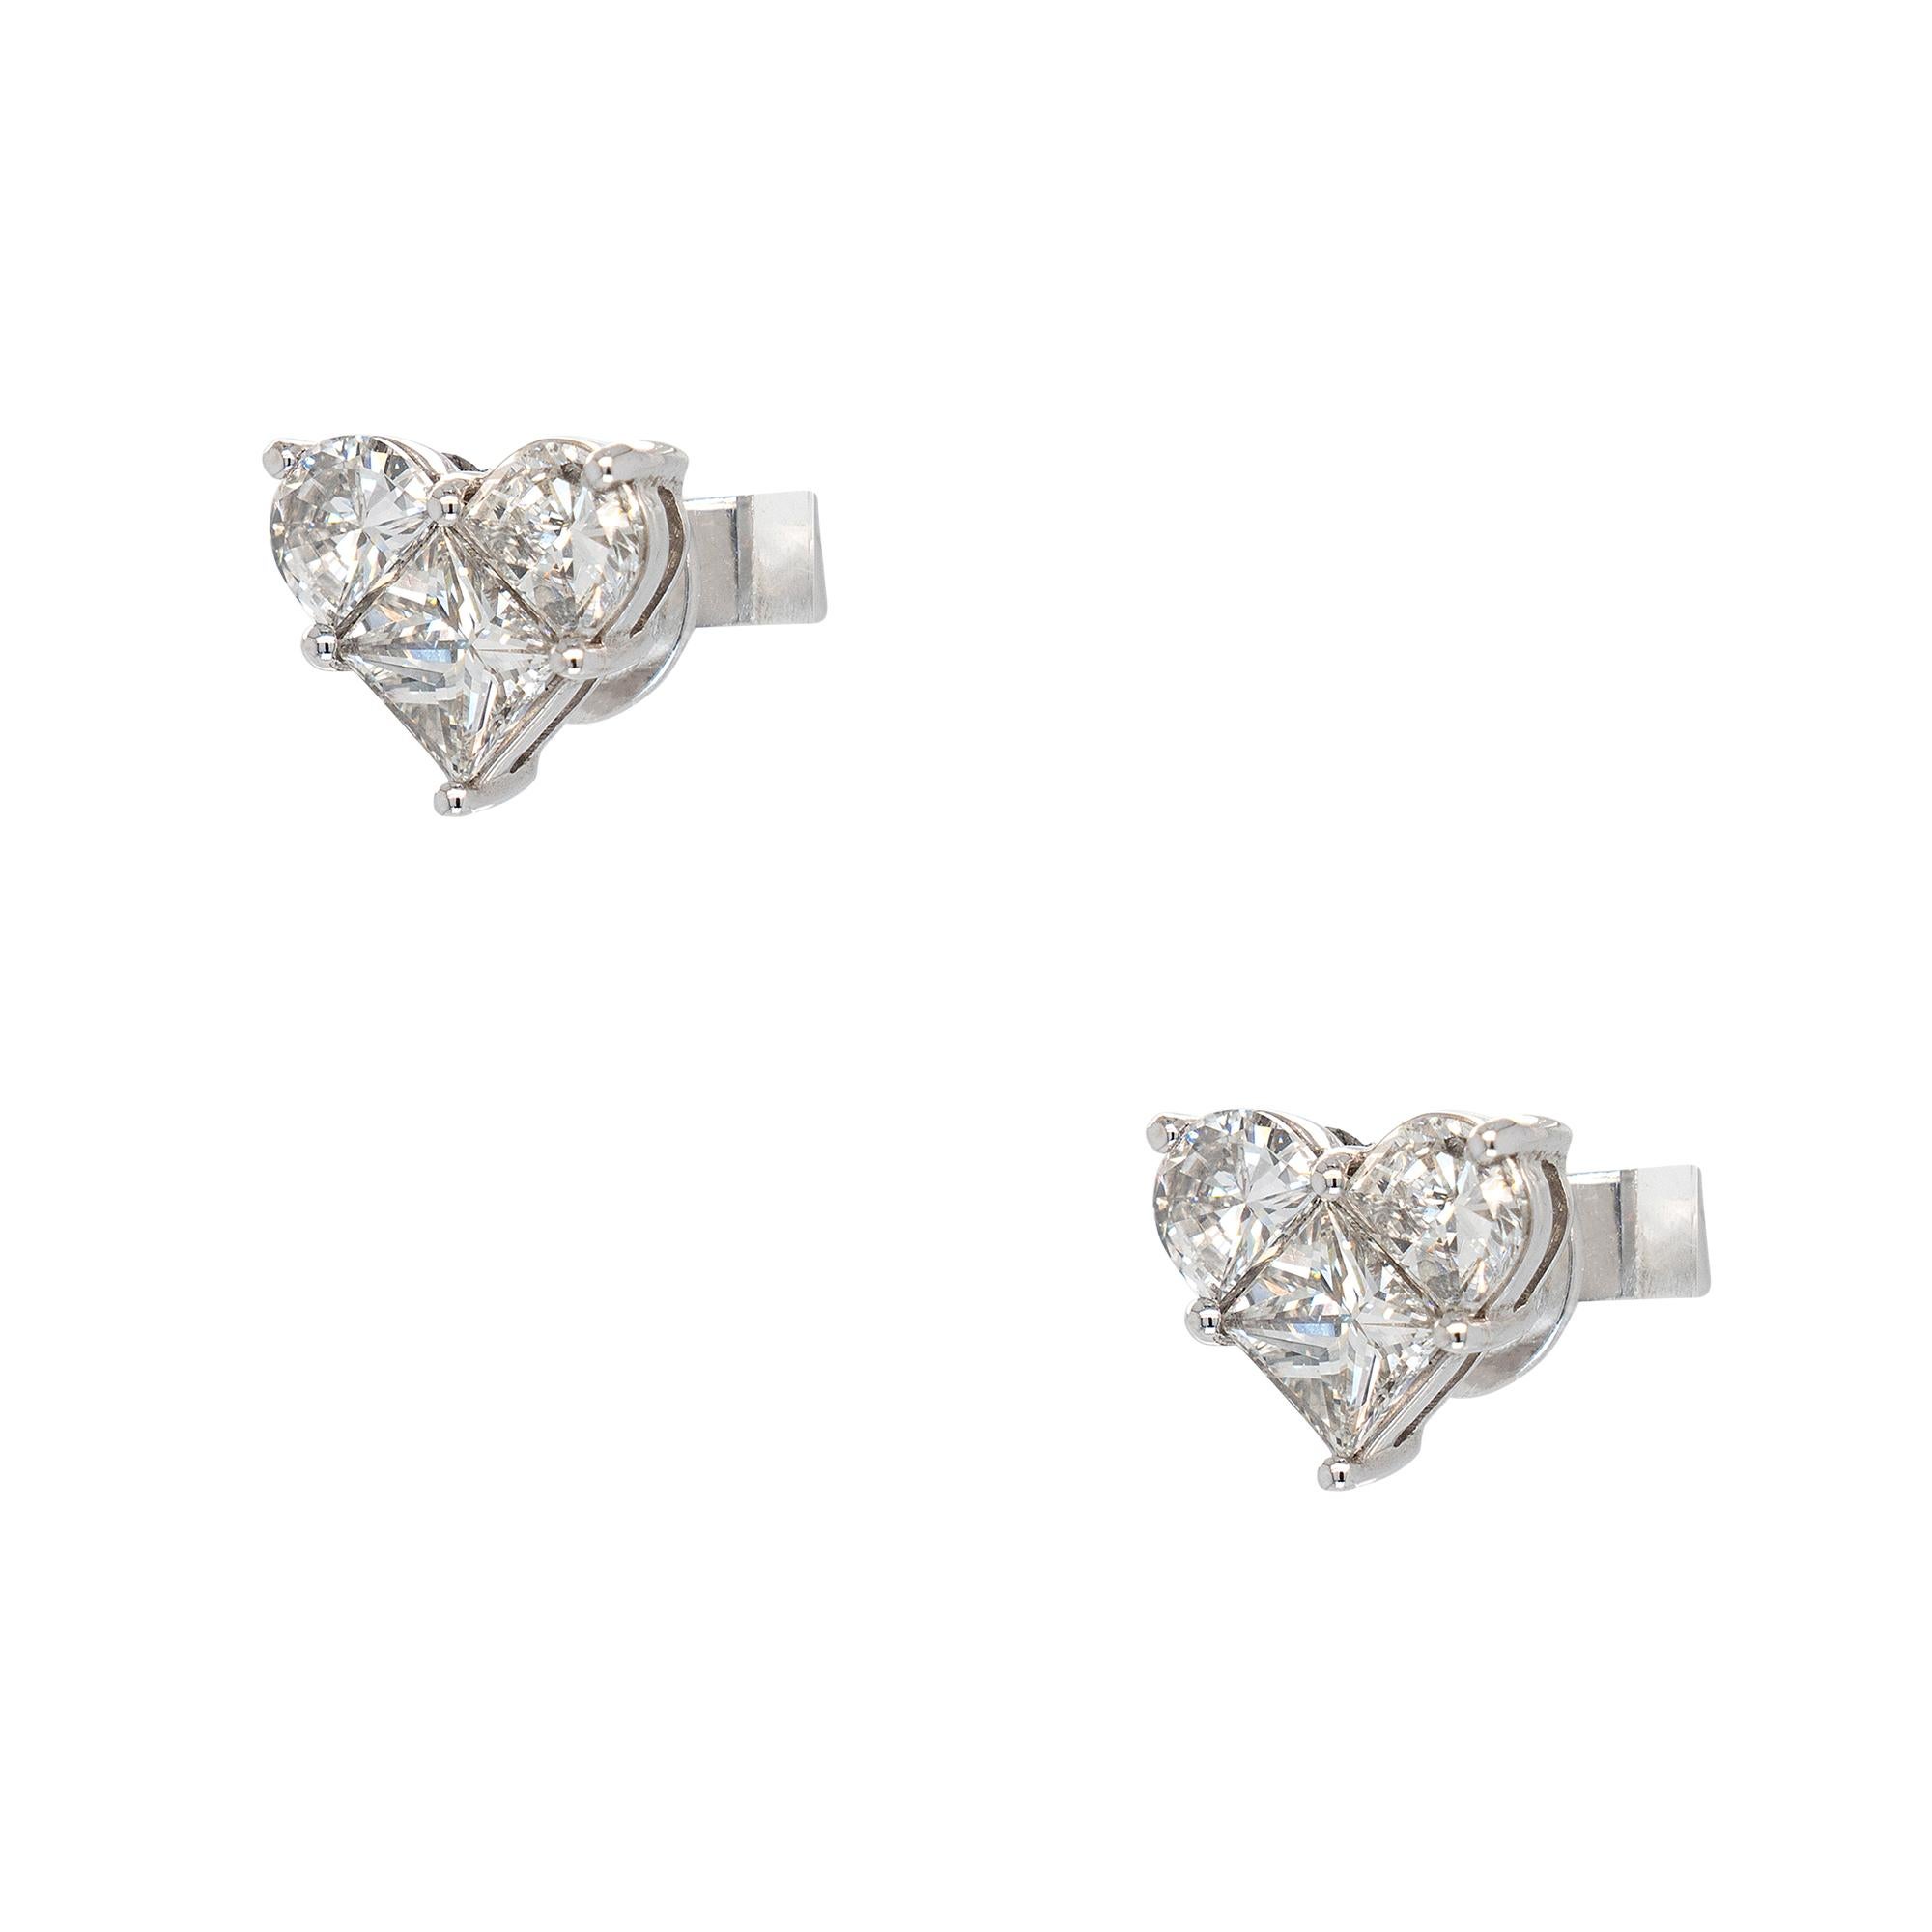 Material: 18k White Gold
Diamonds Details:
1.32ct Round Brilliant Natural Diamond
G Color VS Clarity
Measurements: 7.5mm x 8.4mm x 3.5mm
Closure: Push Backs
Total Weight: 2.6g (1.7dwt)
This item comes with a presentation box!
SKU: A30317291

Each